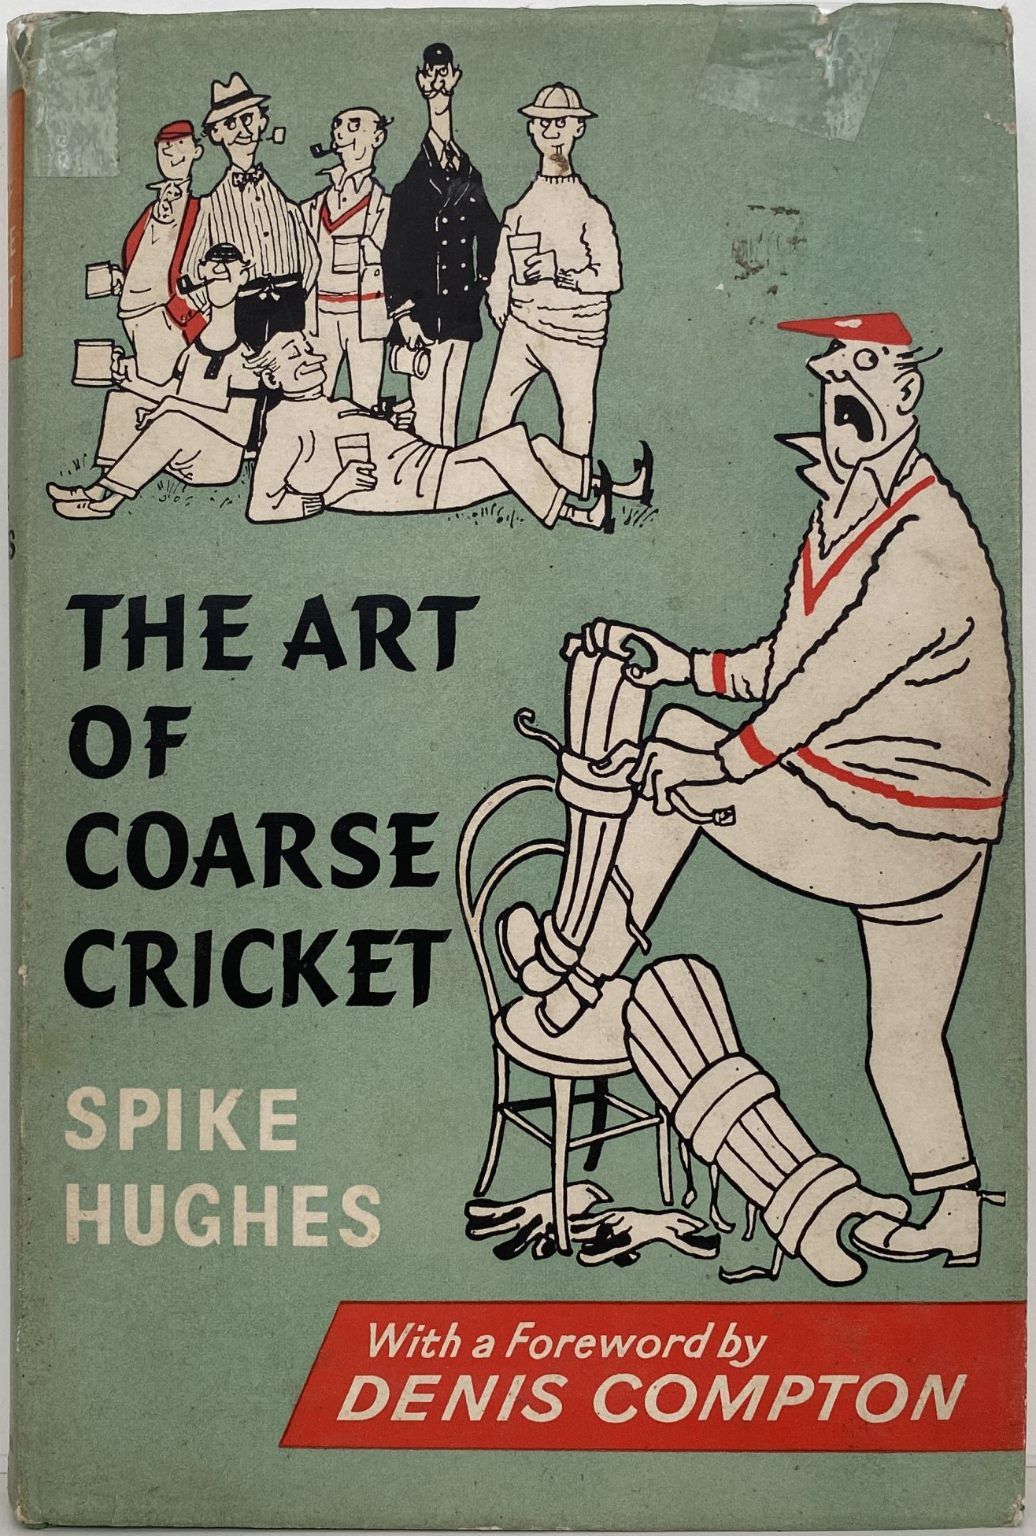 THE ART OF COURSE CRICKET